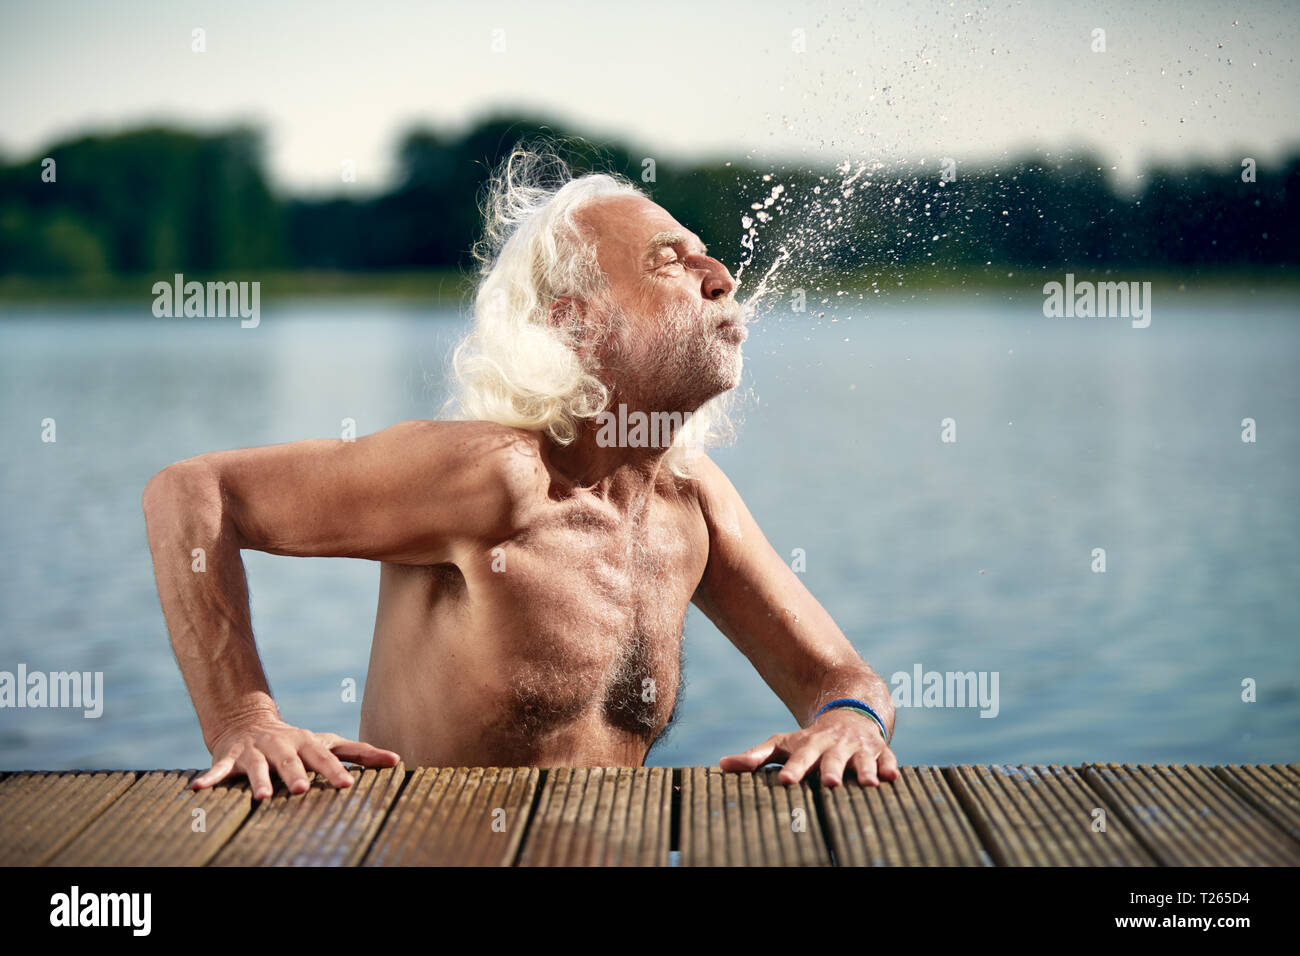 Senior man with white hair leaning on jetty splashing with water Stock Photo